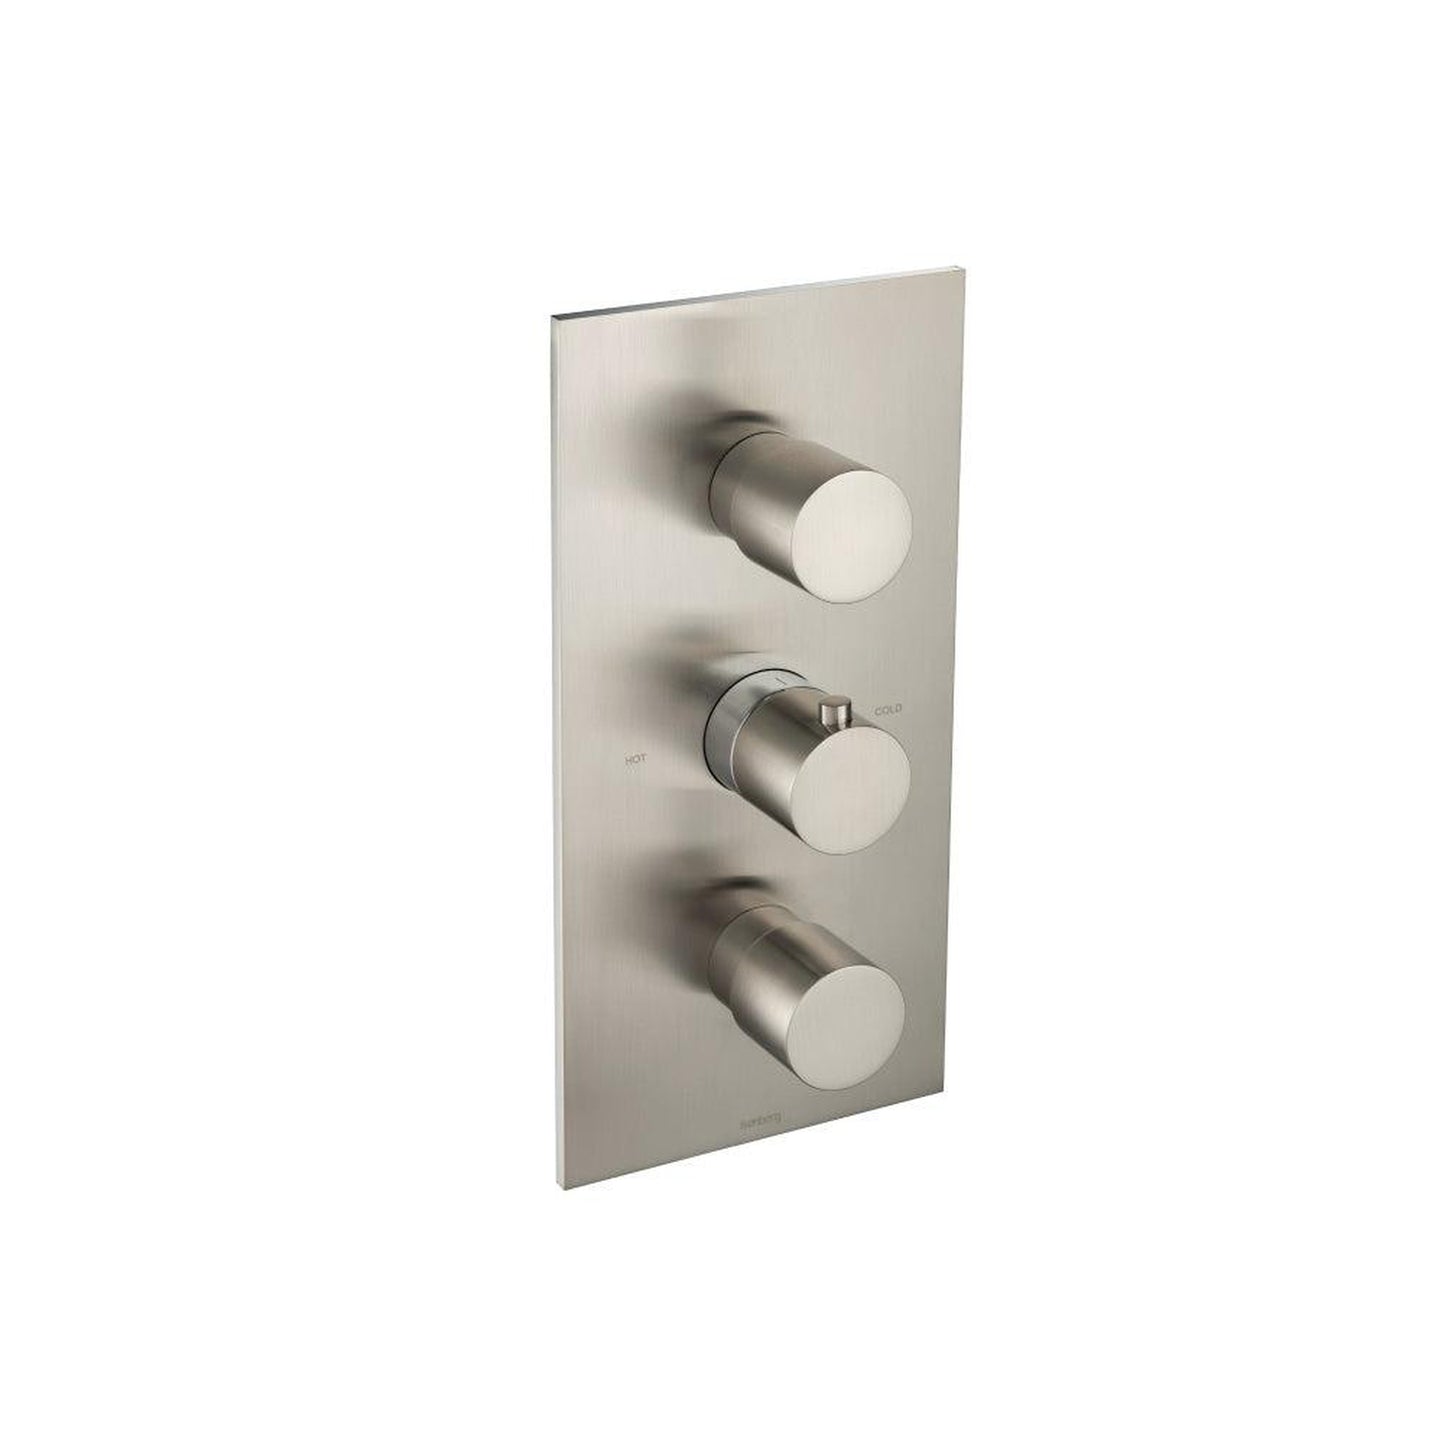 Isenberg Serie 100 Trim for Thermostatic Valve in Brushed Nickel (100.4500TBN)